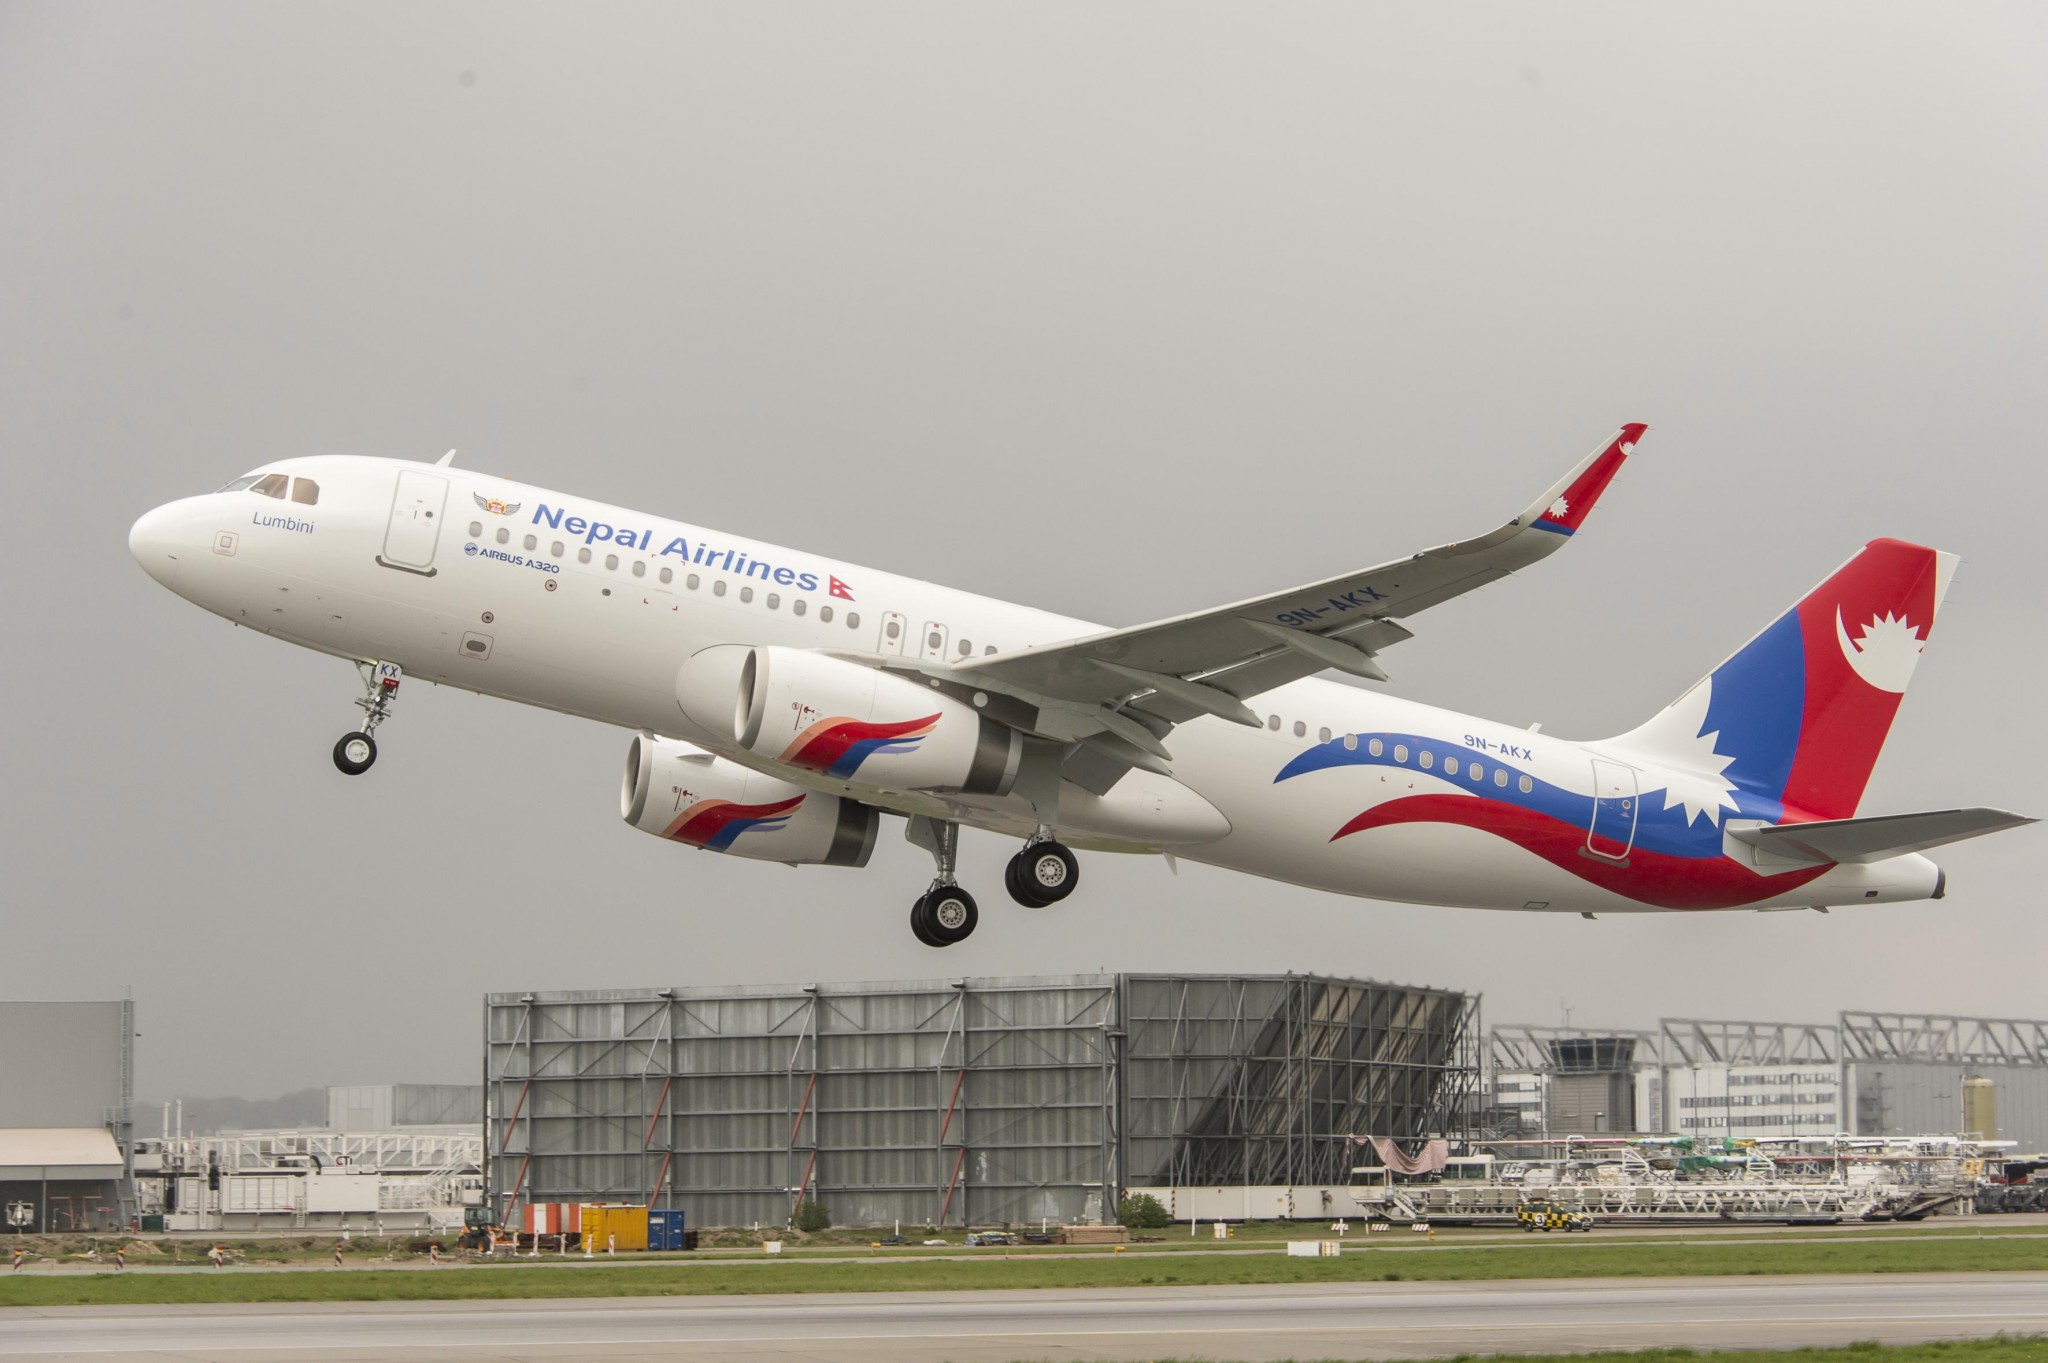 Nepal Airlines plans to ramp up domestic operations with new aircraft